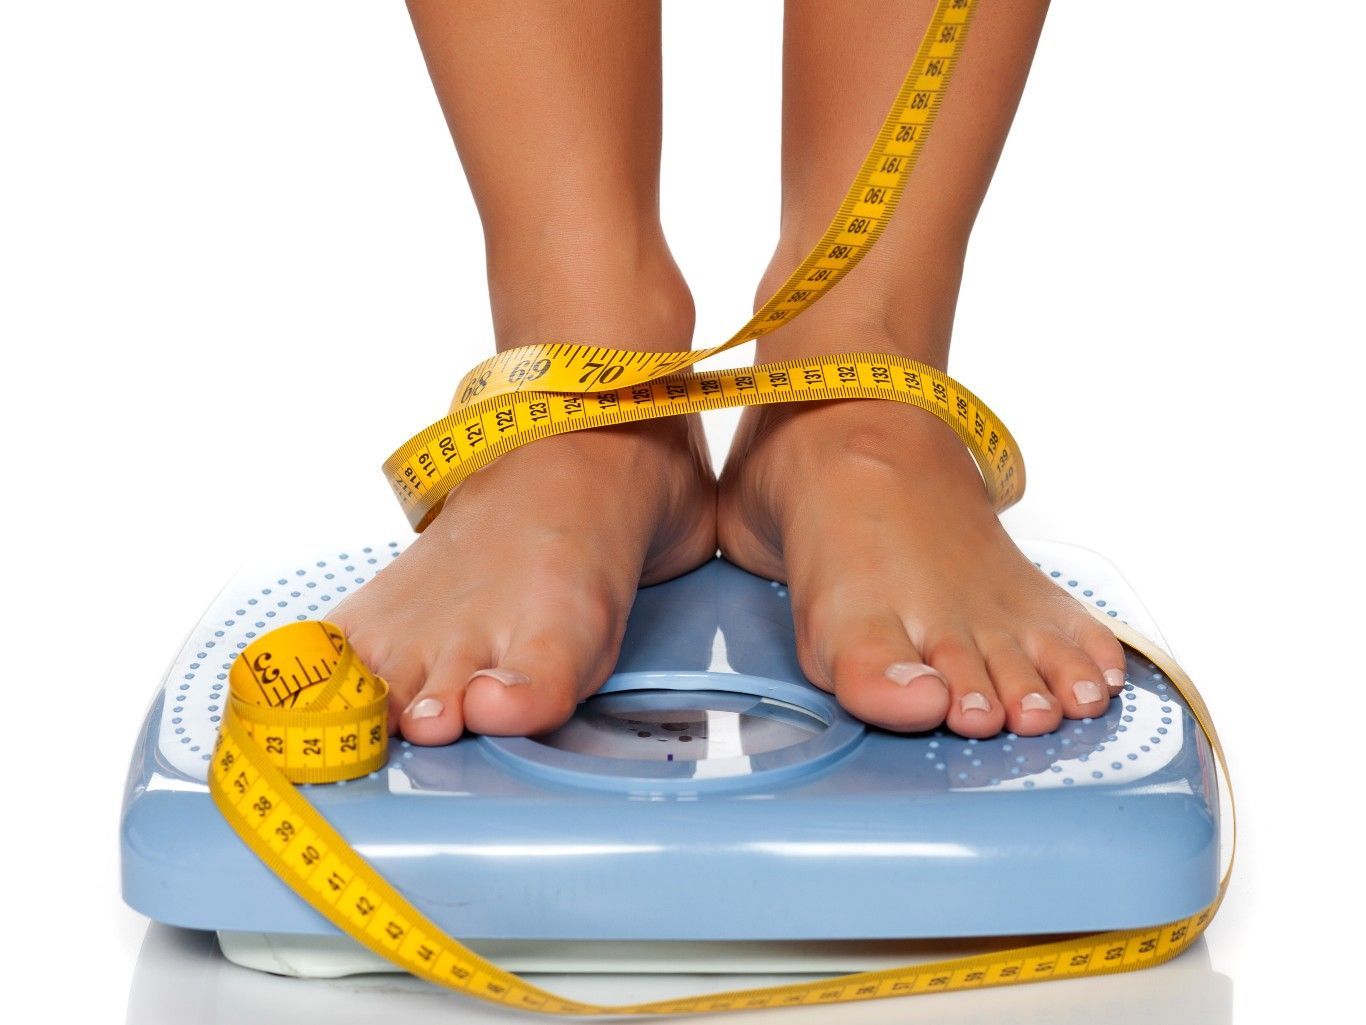 Why Body Weight or BMI Isn't an Indicator of Health